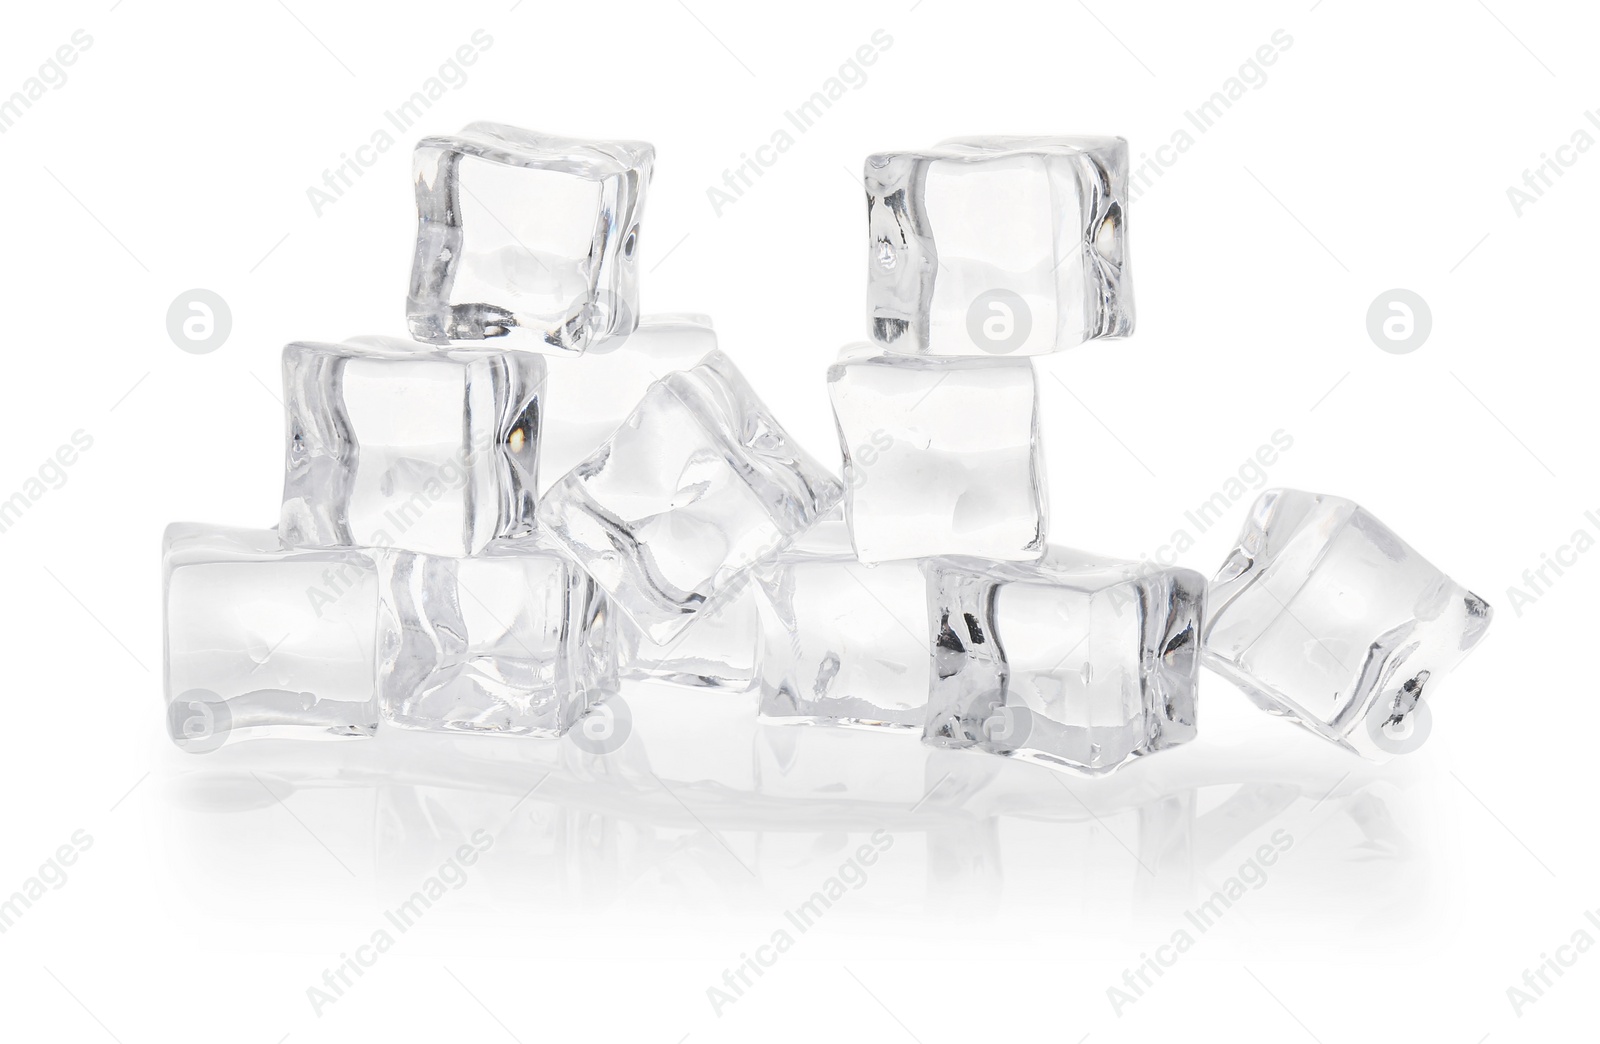 Photo of Many melting crystal clear ice cubes isolated on white